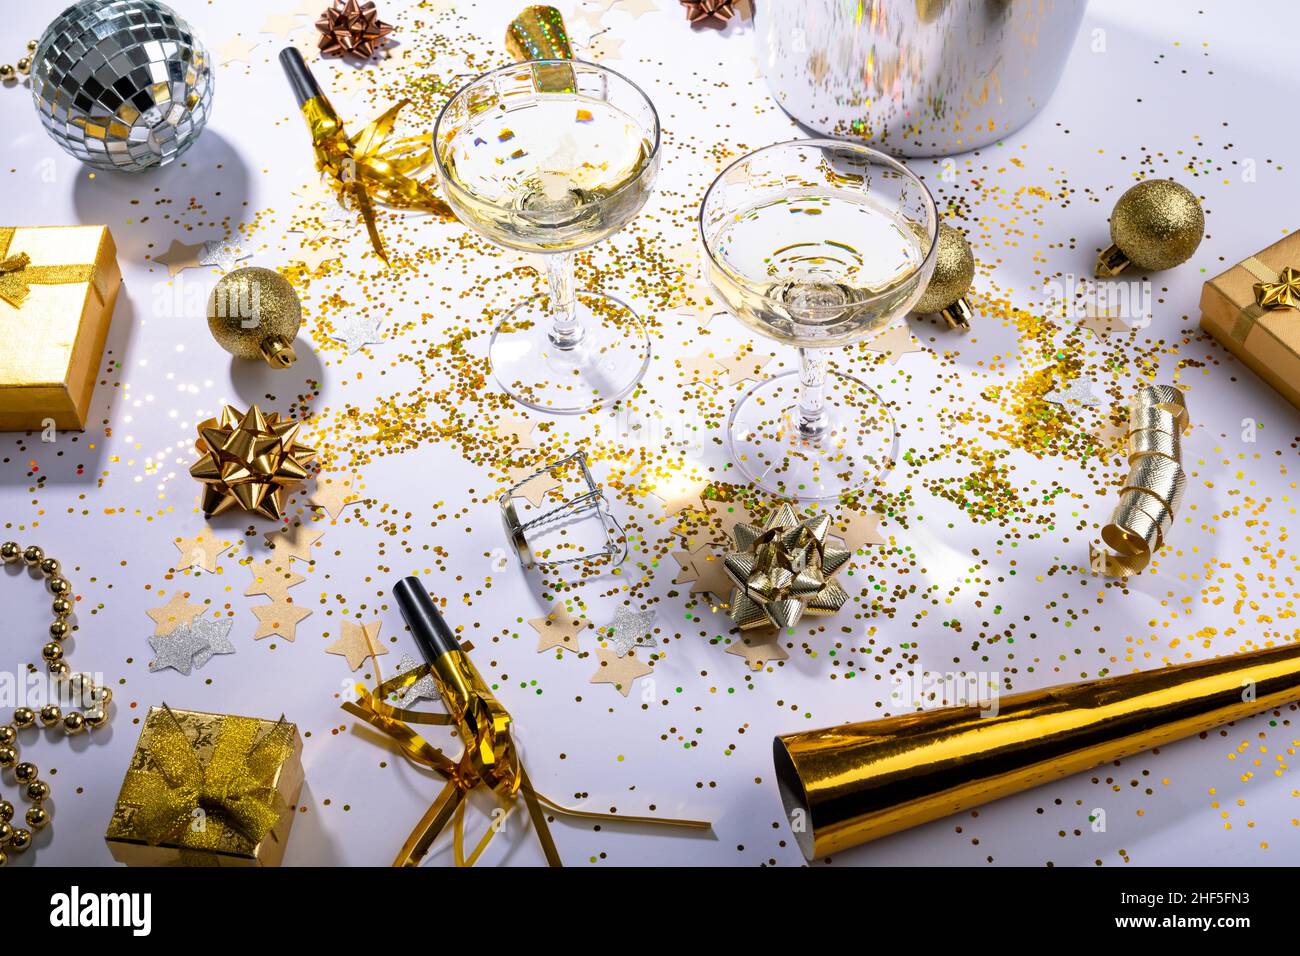 Champagne glasses with gold and silver colored decoration on table, copy space Stock Photo